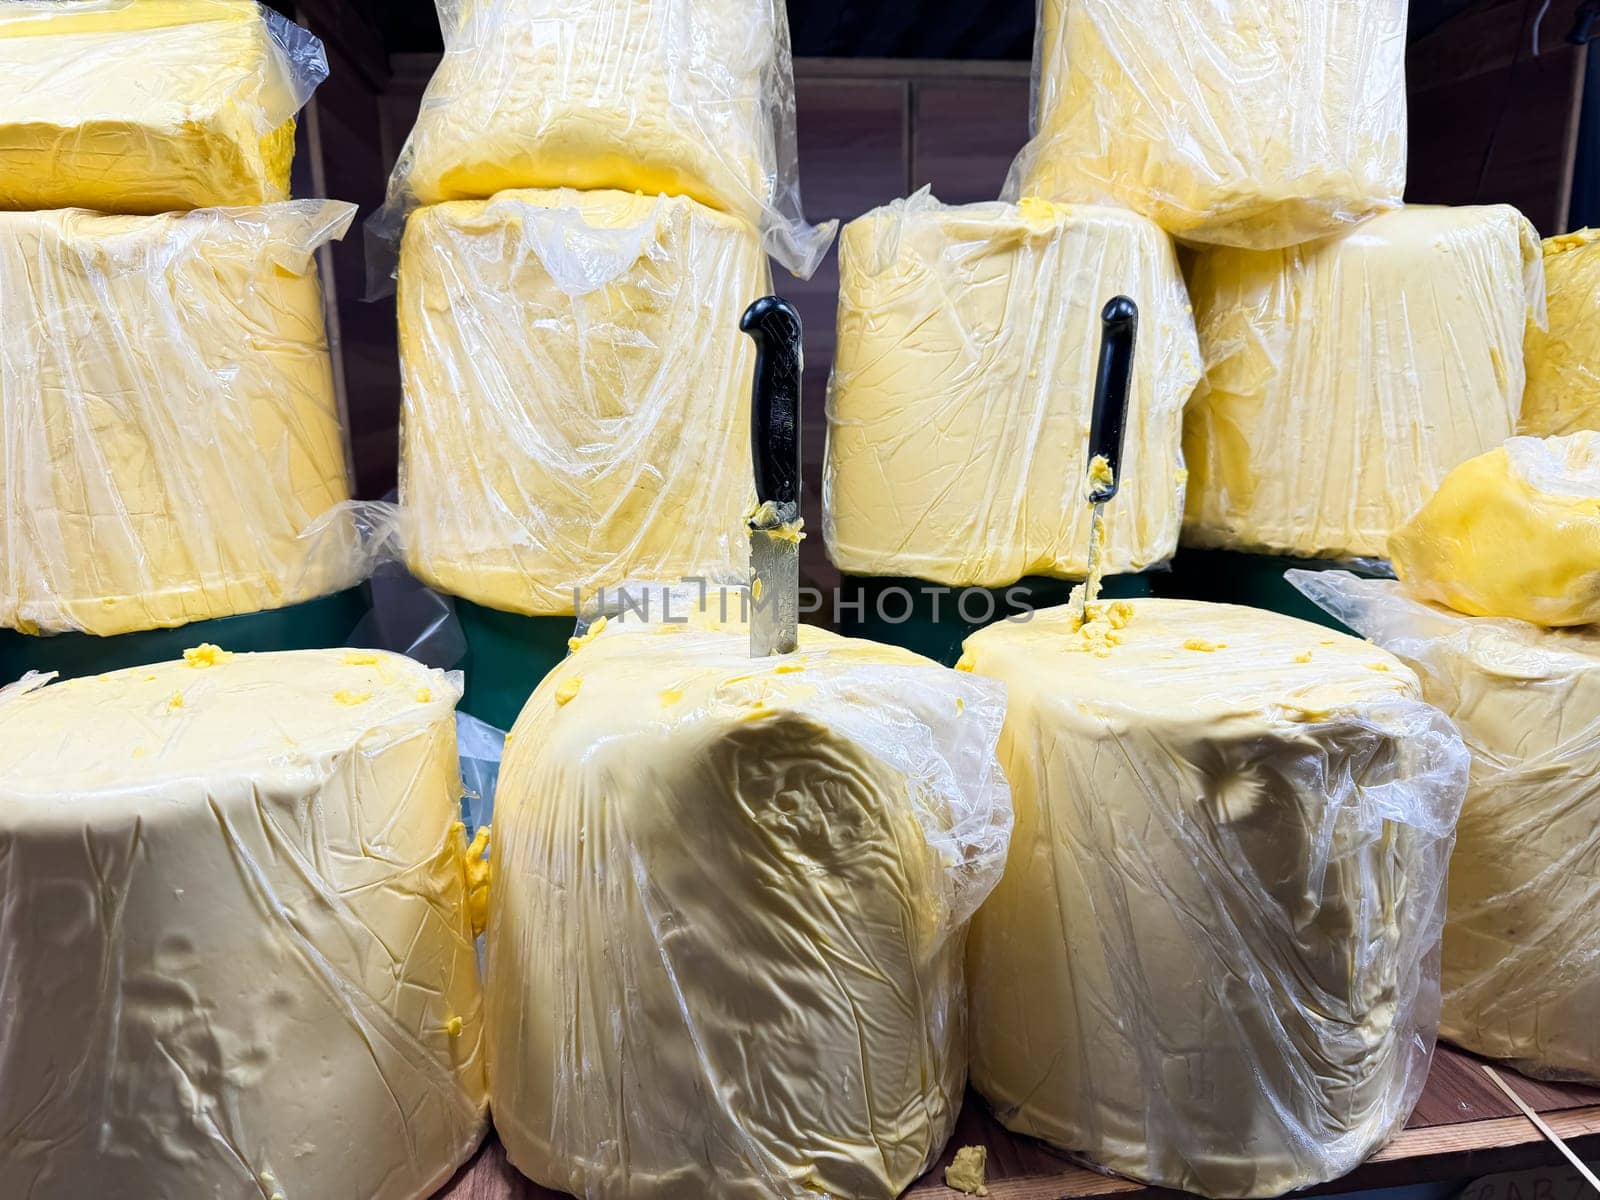 Large blocks of butter wrapped in plastic packet with knives inserted, displayed on wooden shelf at market stall. Food industry. by Lunnica